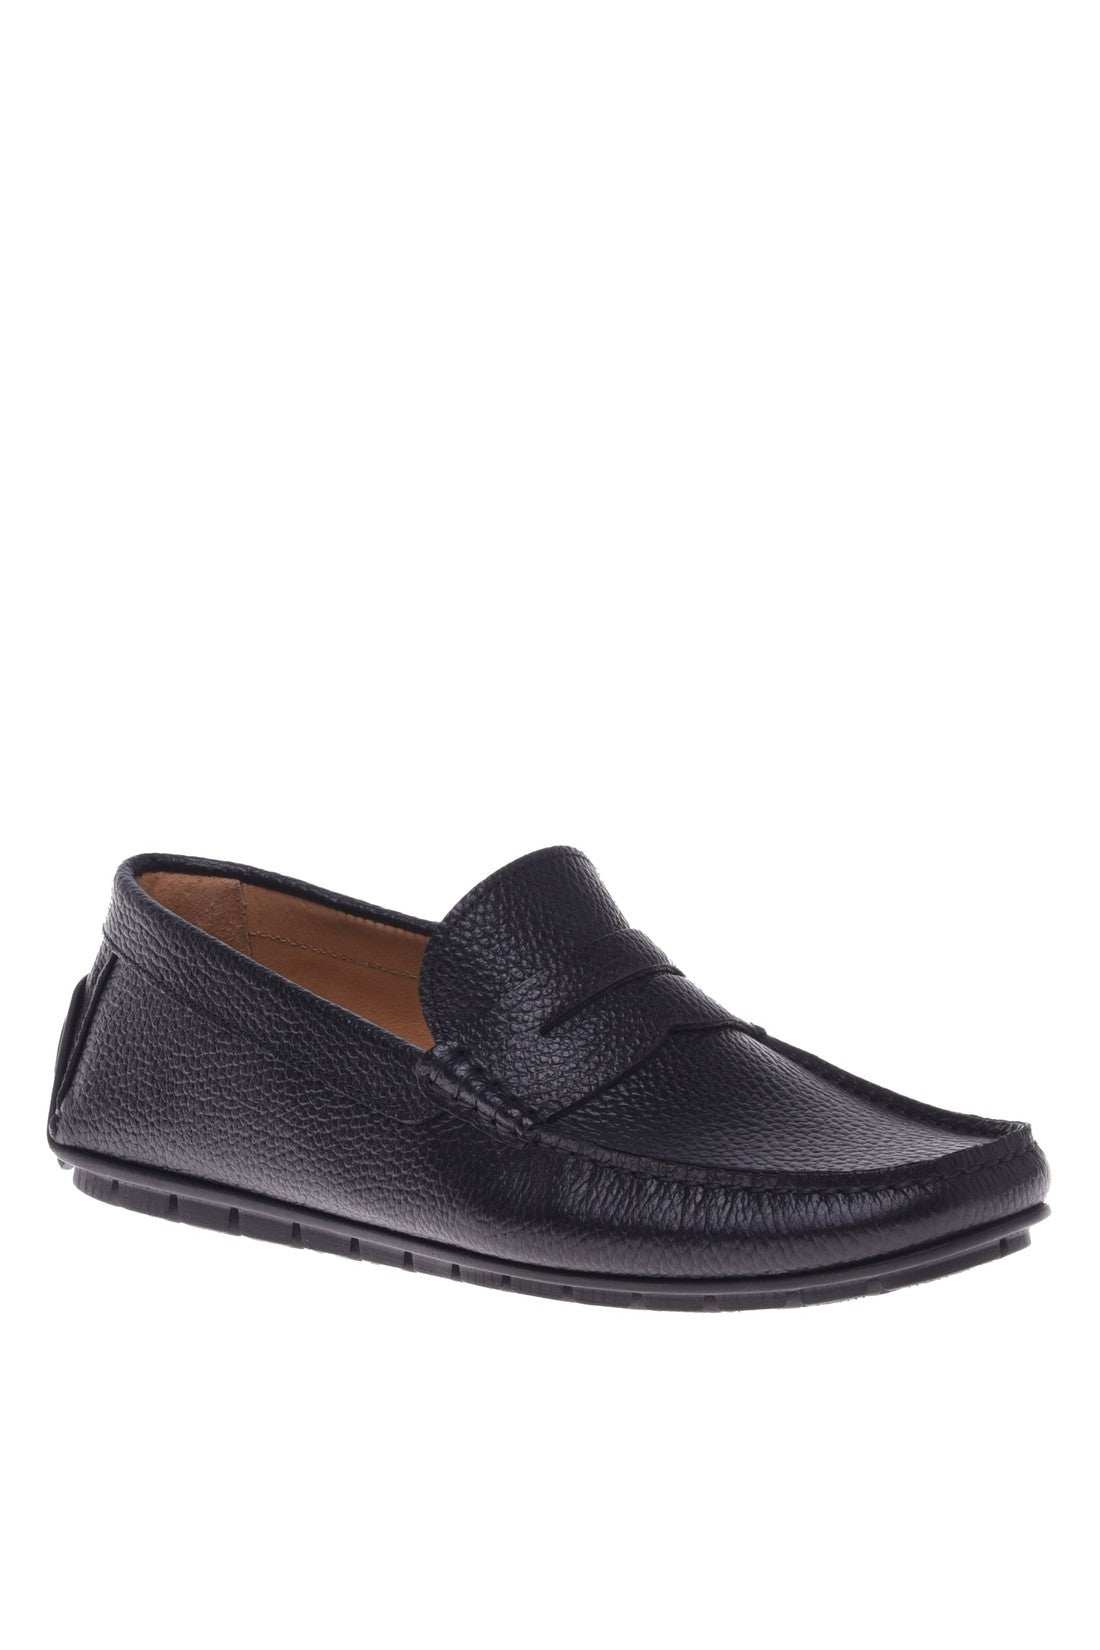 Loafer in black tumbled leather